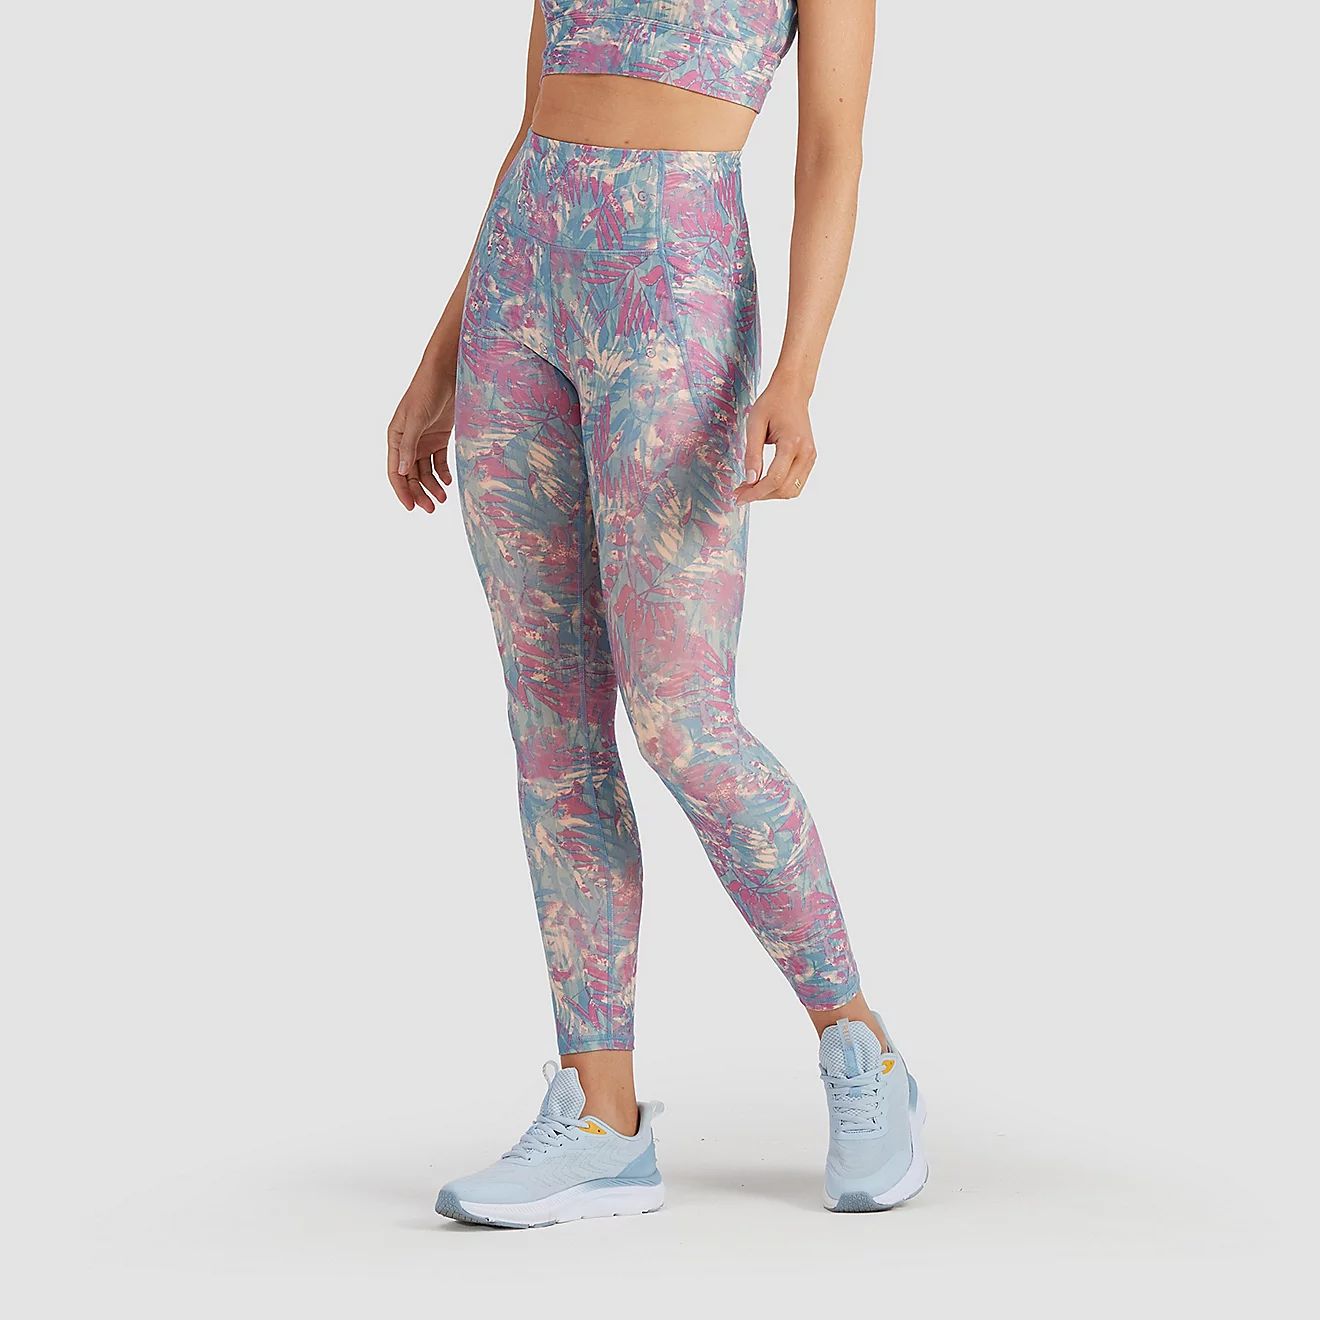 Freely Women’s Haven Luxe Legging | Free Shipping at Academy | Academy Sports + Outdoors